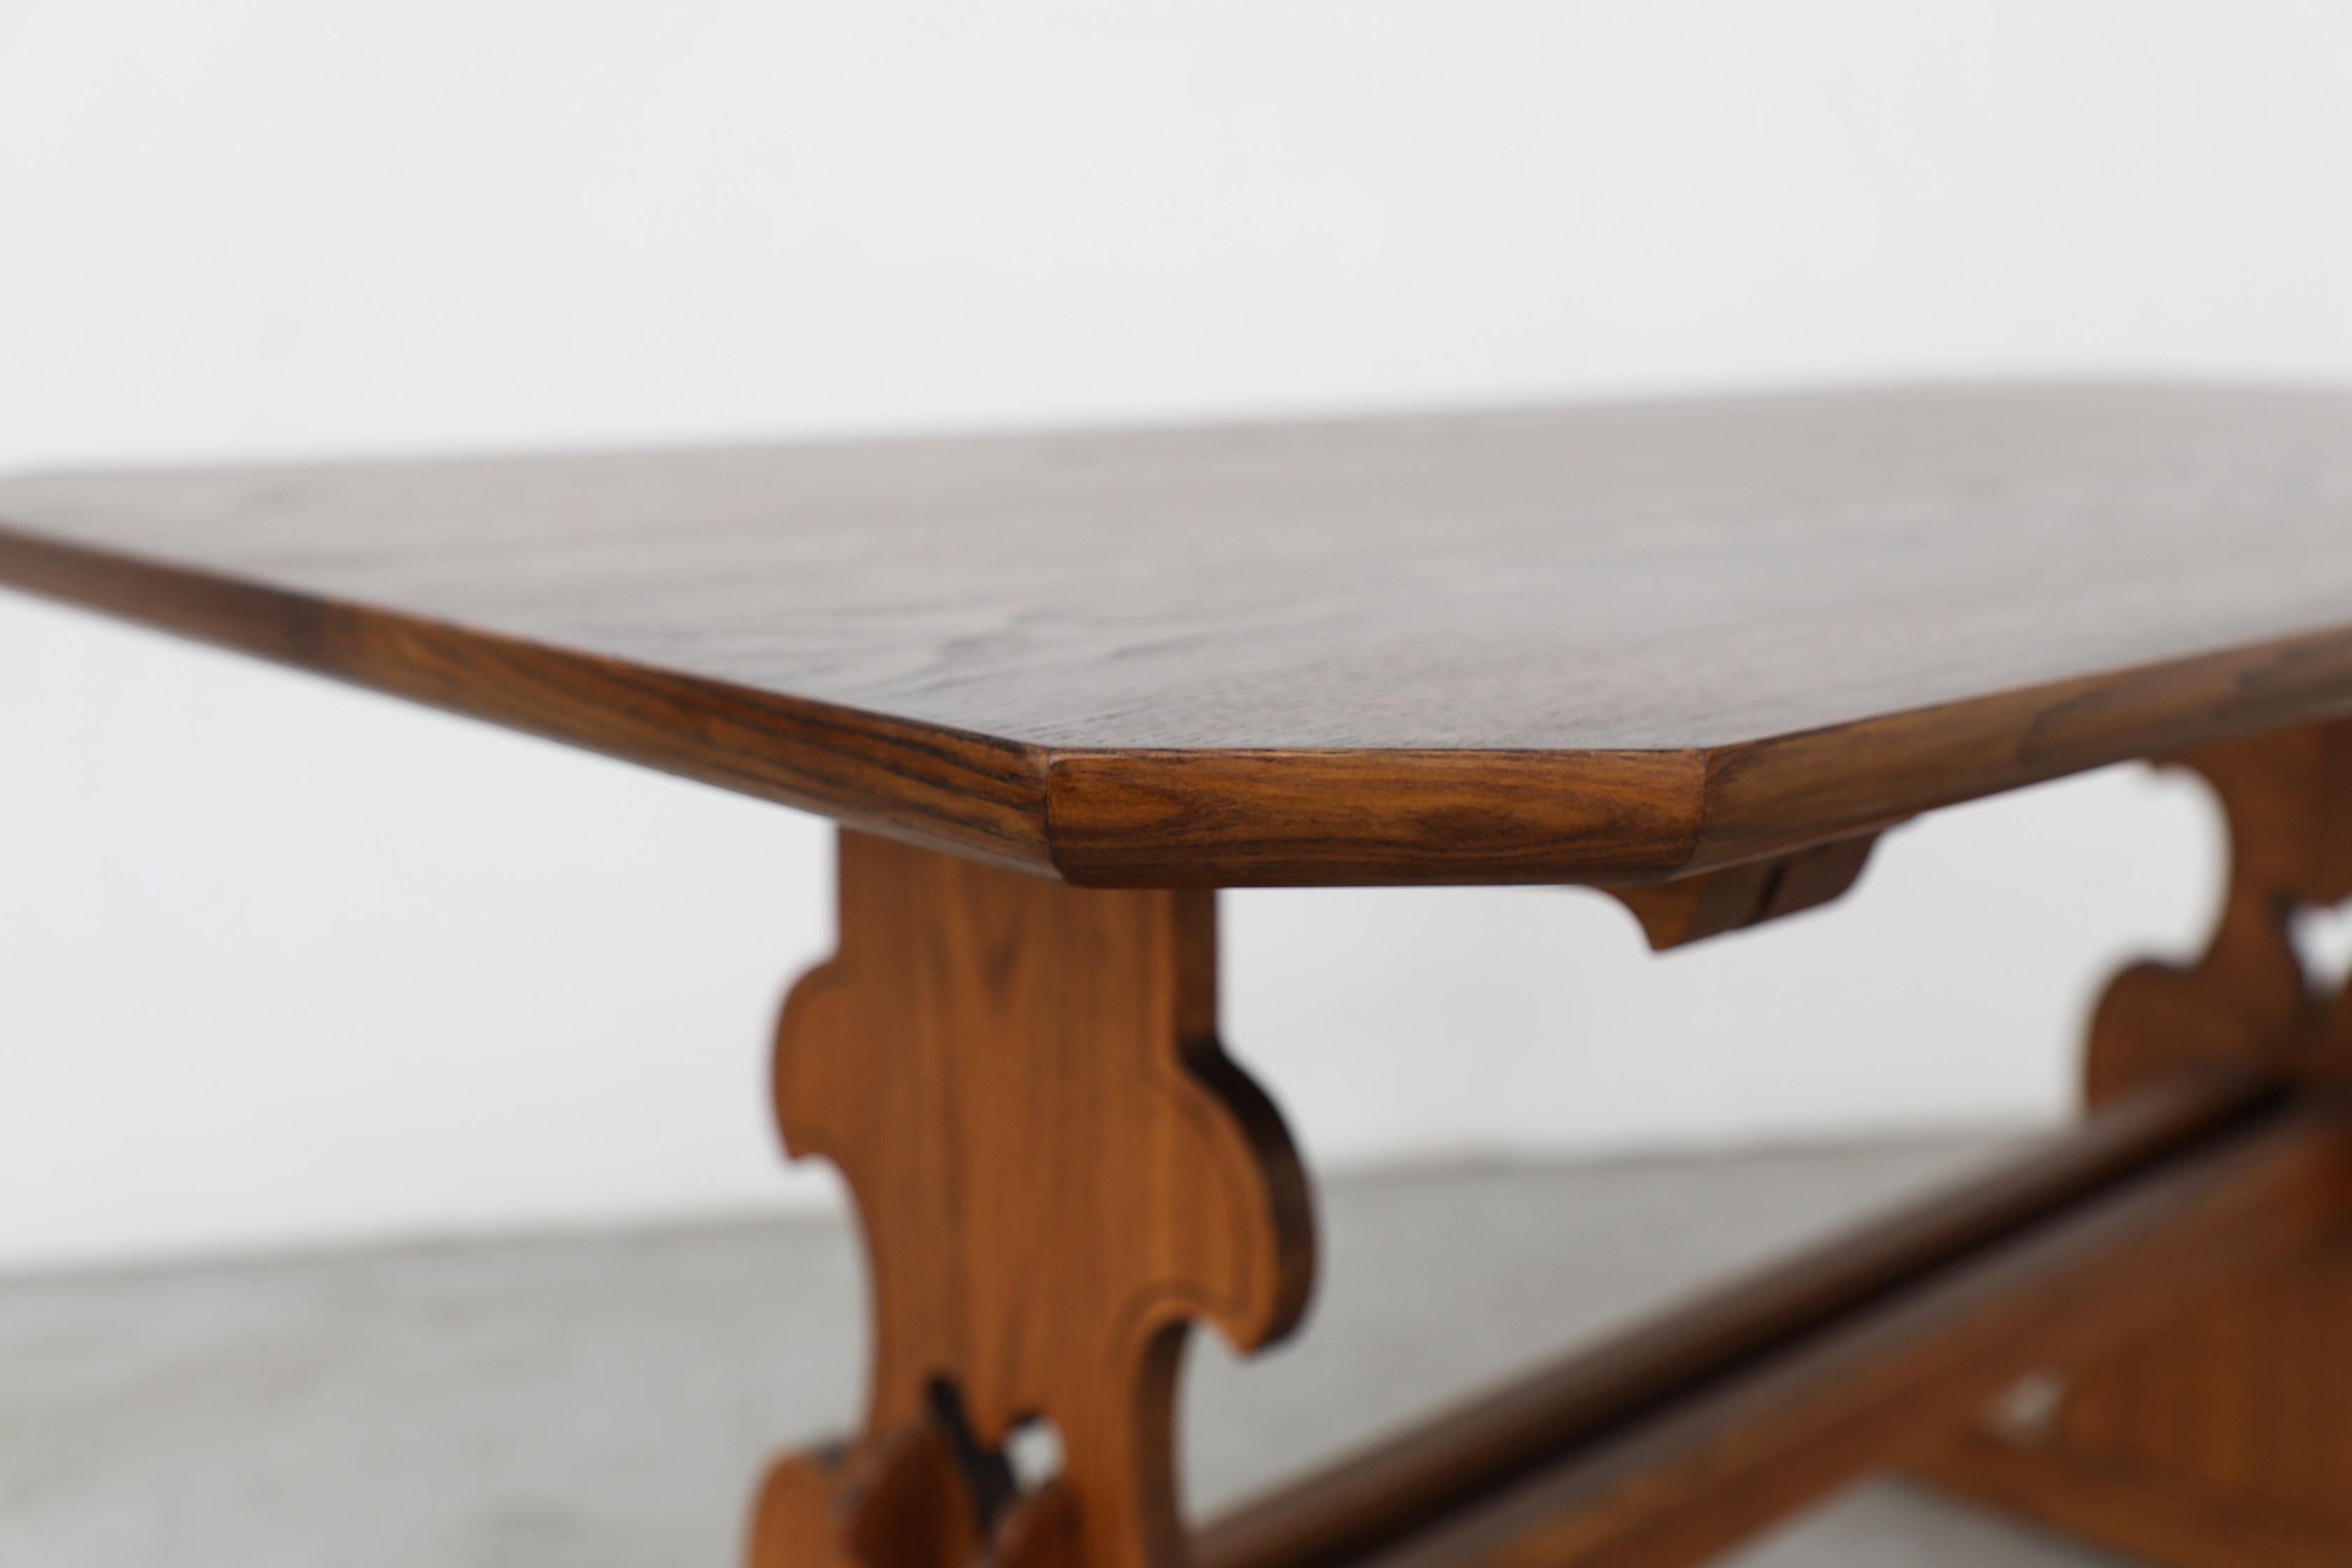 Austrian Ornate Brutalist Tyrolean Style Dark Pine Table with Angled Corners 4